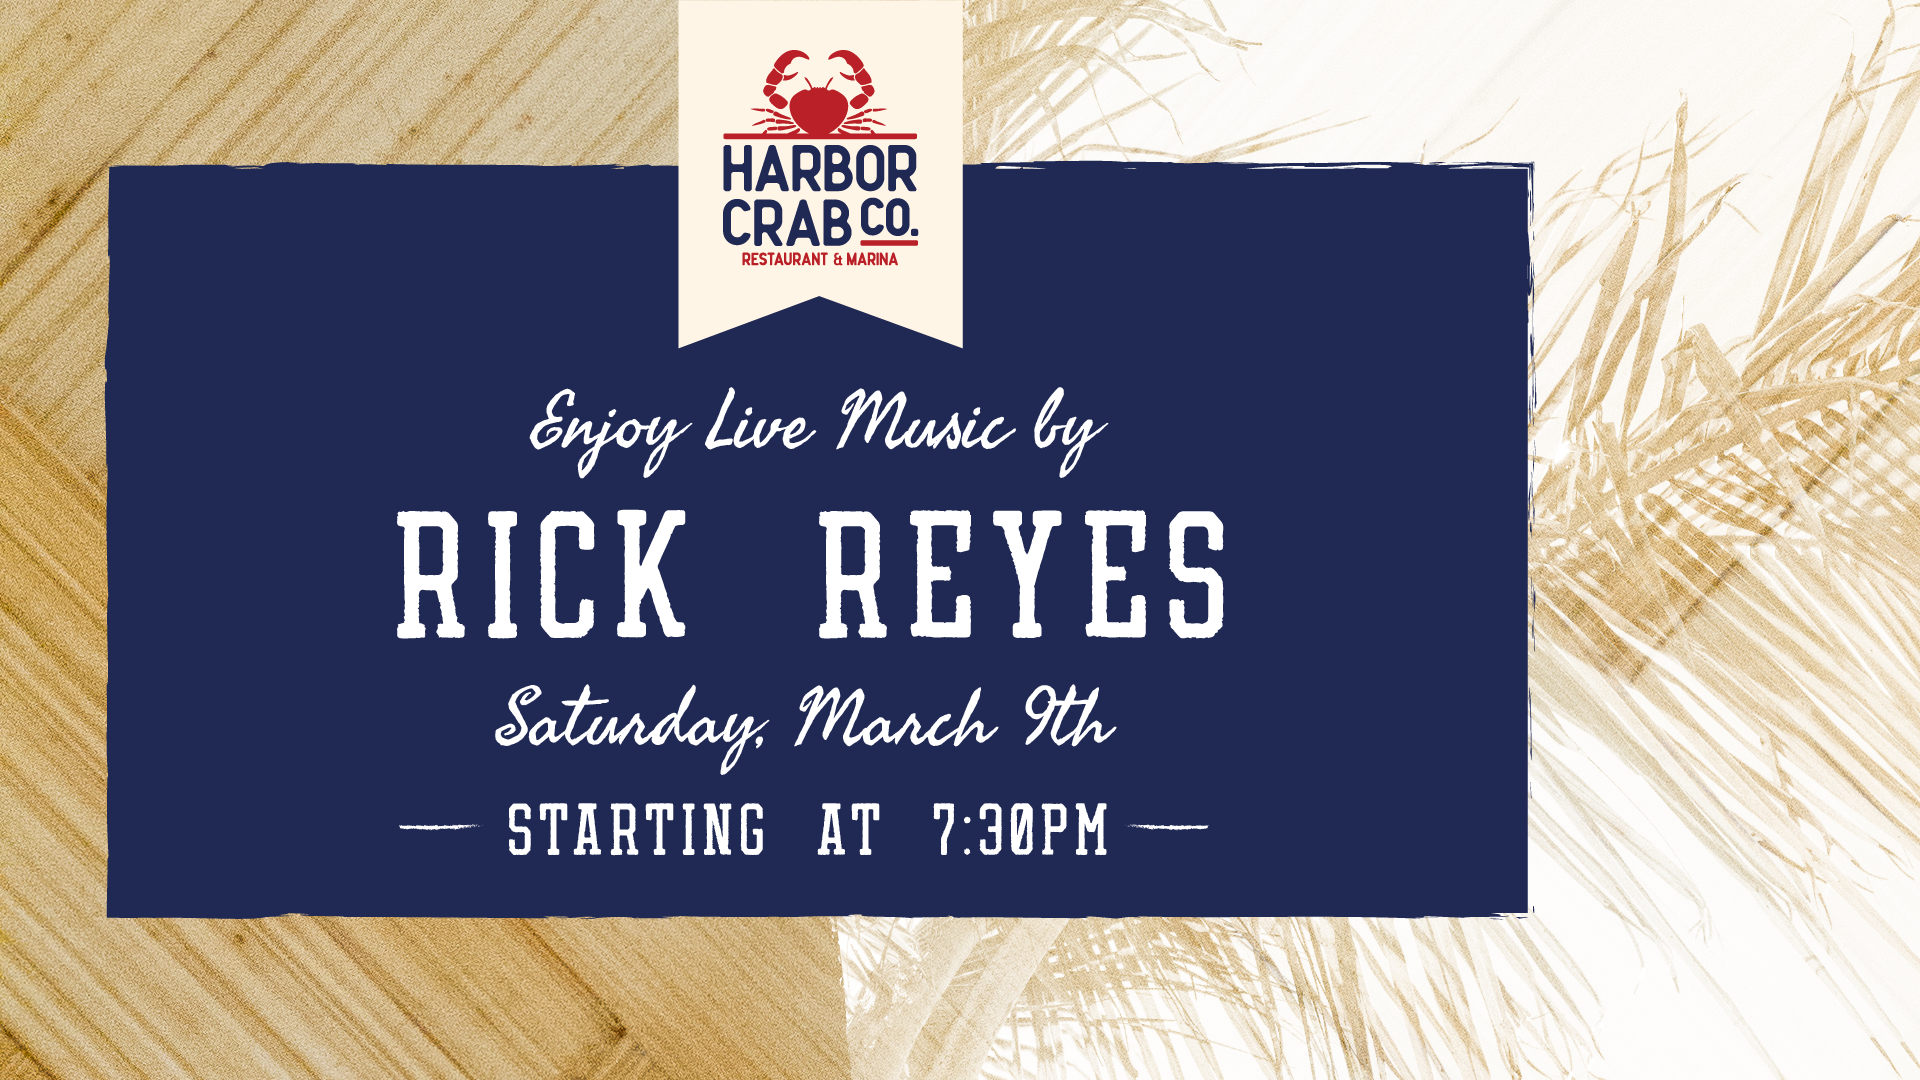 Promotional image for a live music night at Harbor Crab with Rick Reyes, scheduled for Saturday, March 9th at 7:30 PM